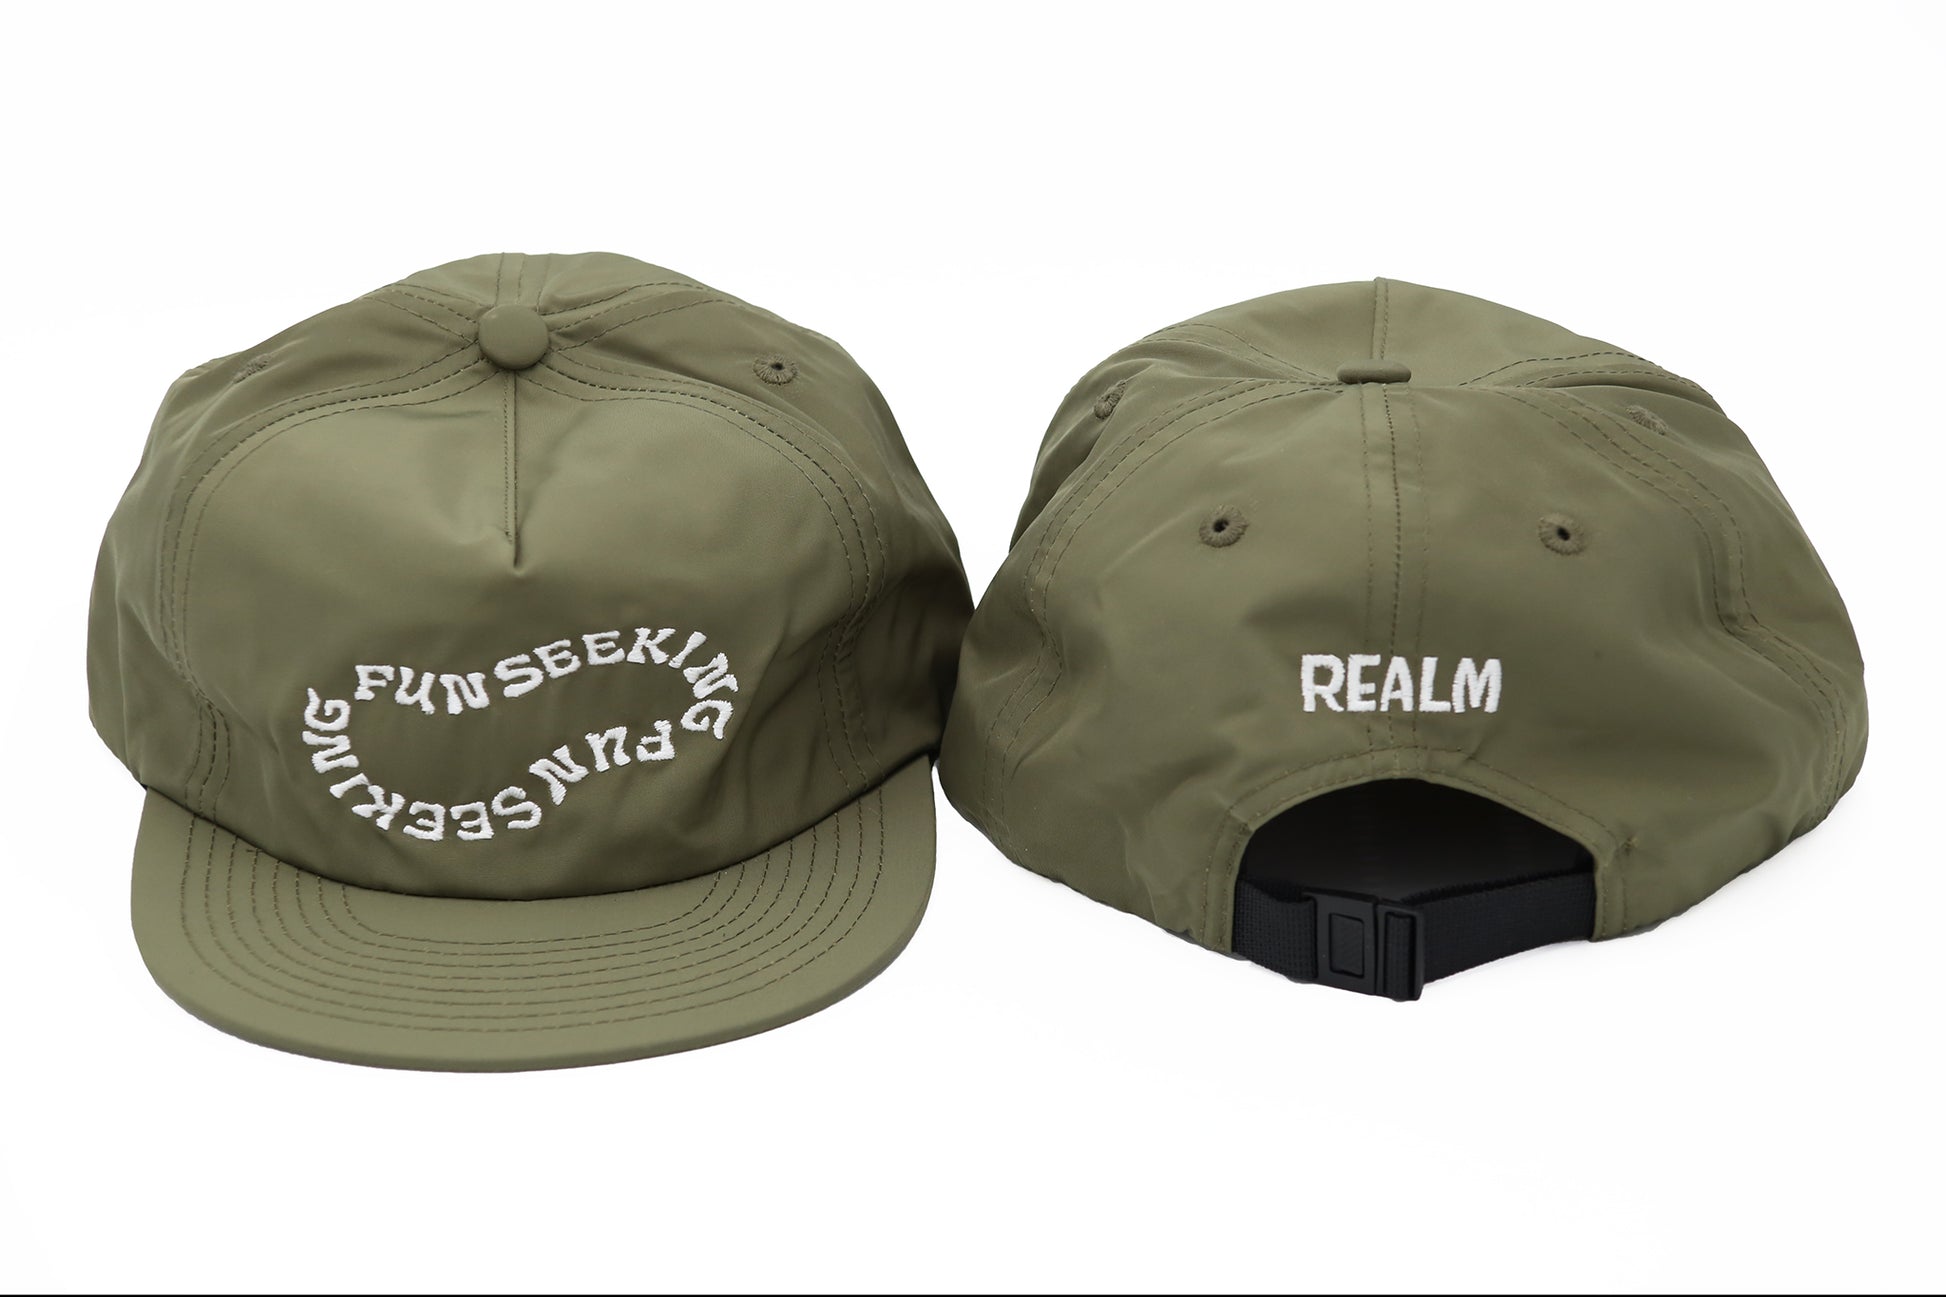 olive green nylon hat embroidered on the front with the image of the word "fun seeking" in an organic shape, logo "realm" embroidered on the back